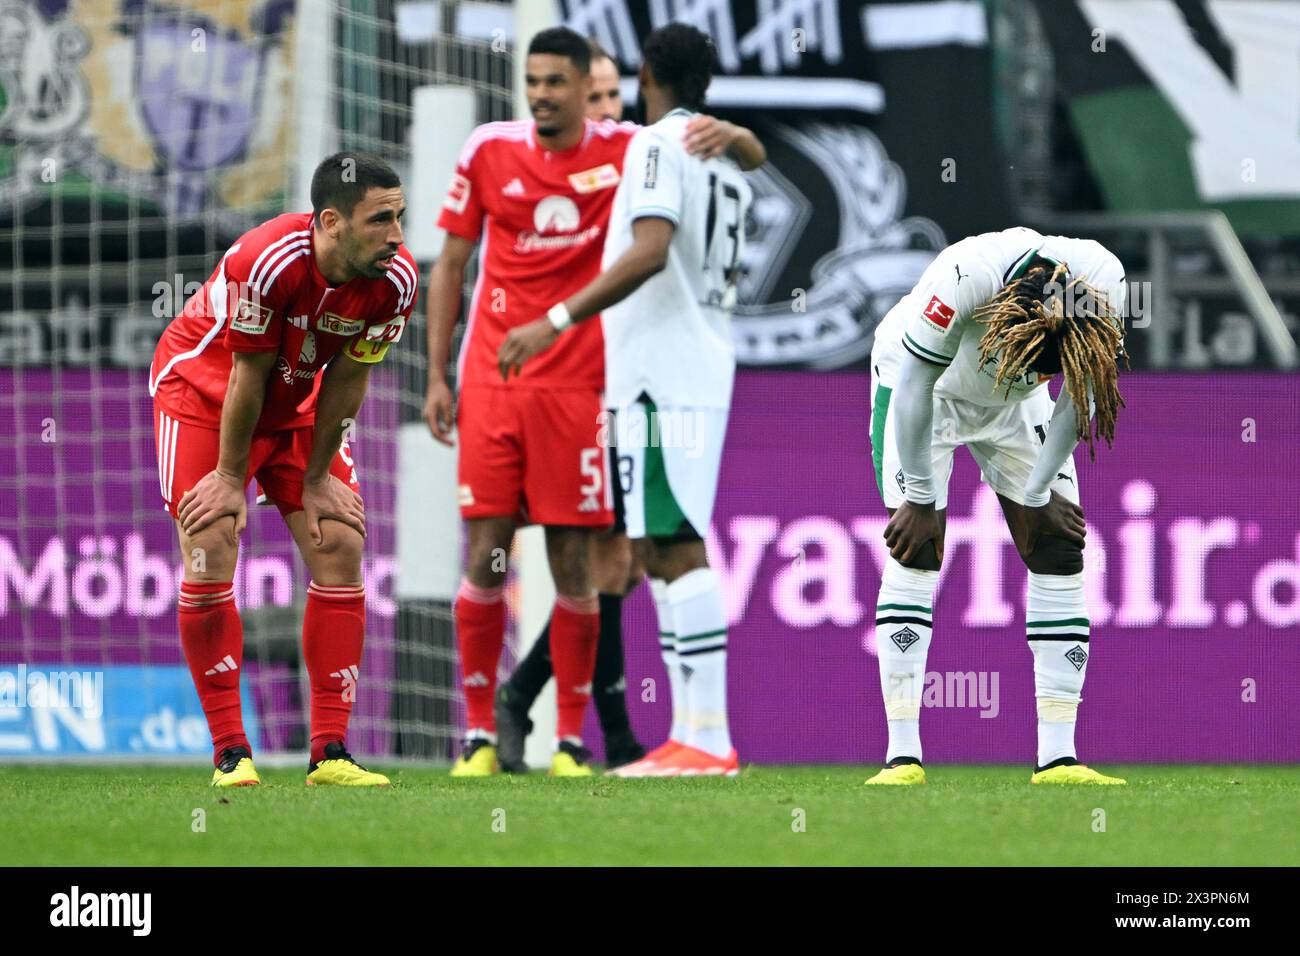 28 April 2024, North Rhine-Westphalia, Mönchengladbach: Soccer: Bundesliga, Borussia Mönchengladbach - 1. FC Union Berlin, matchday 31, Borussia-Park stadium. Mönchengladbach's Manu Kone (r) and Berlin's Rani Khedira (l) after the match. Photo: Federico Gambarini/dpa - IMPORTANT NOTE: In accordance with the regulations of the DFL German Football League and the DFB German Football Association, it is prohibited to utilize or have utilized photographs taken in the stadium and/or of the match in the form of sequential images and/or video-like photo series. Stock Photo